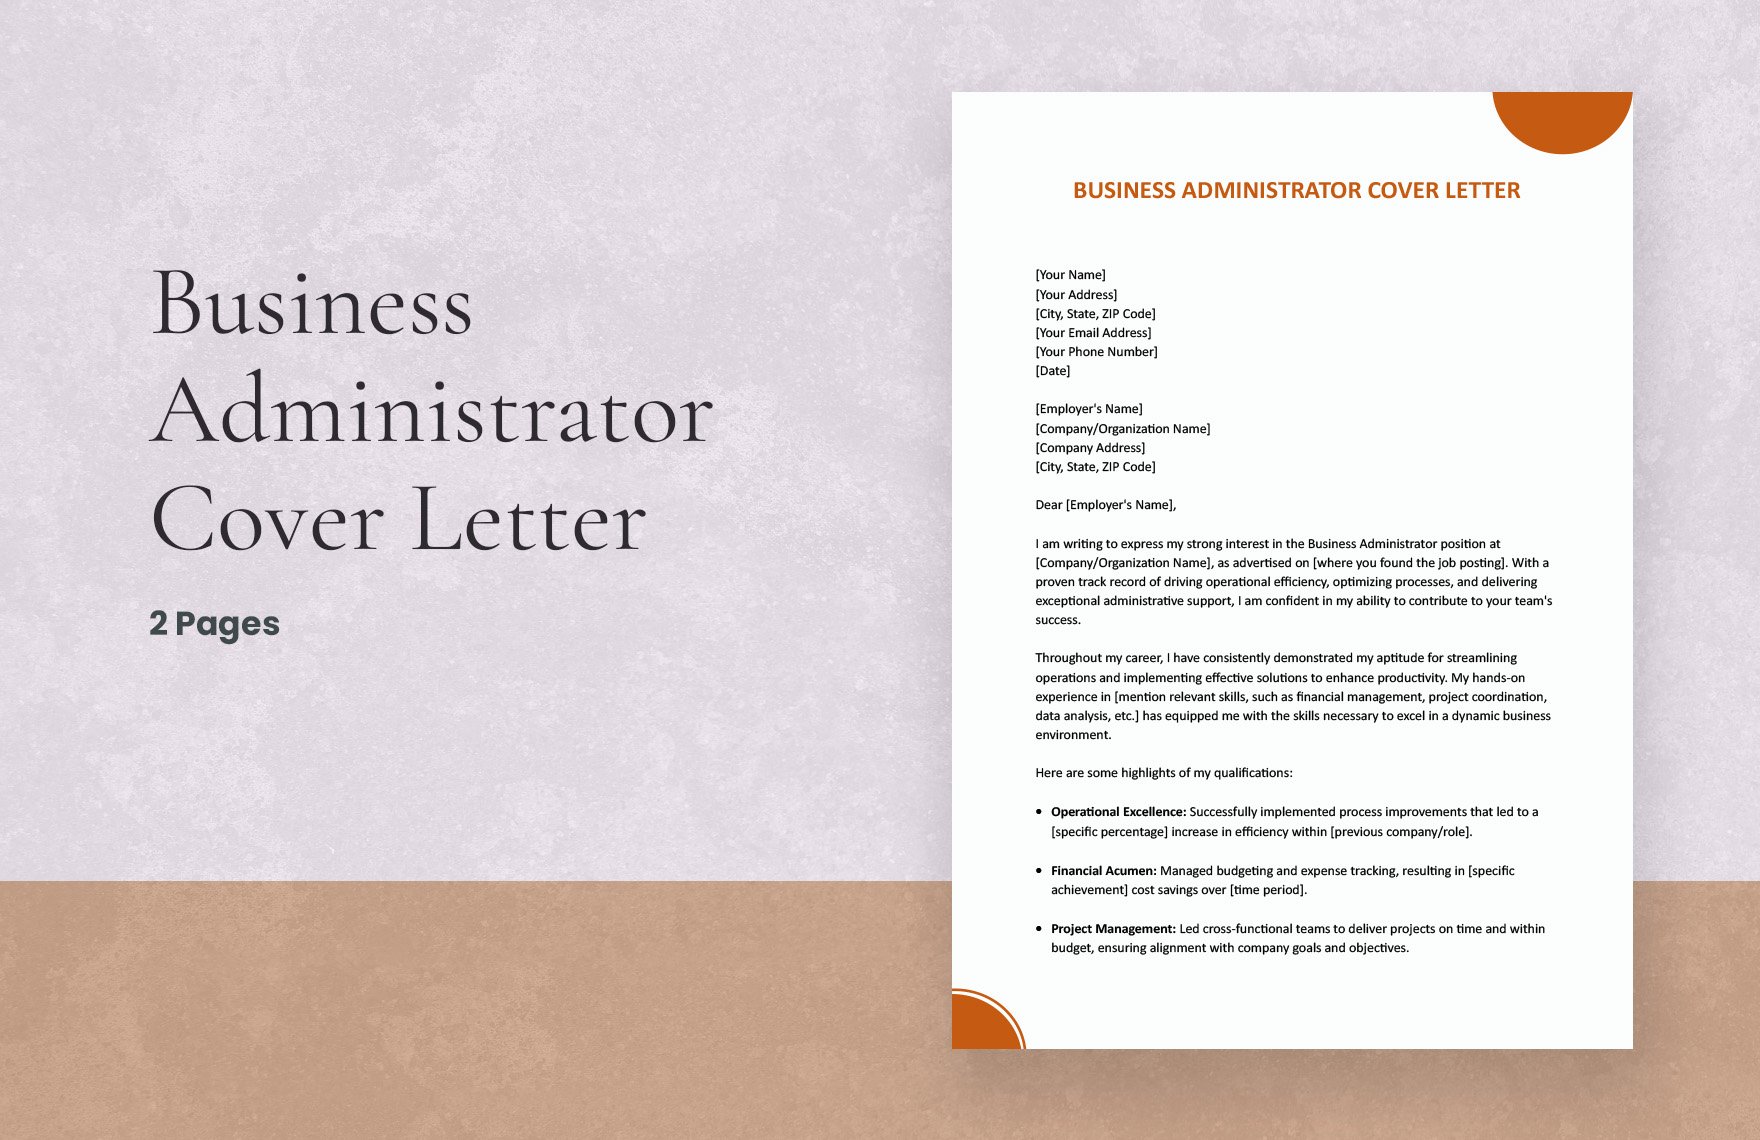 Business Administrator Cover Letter in Word, Google Docs, Apple Pages